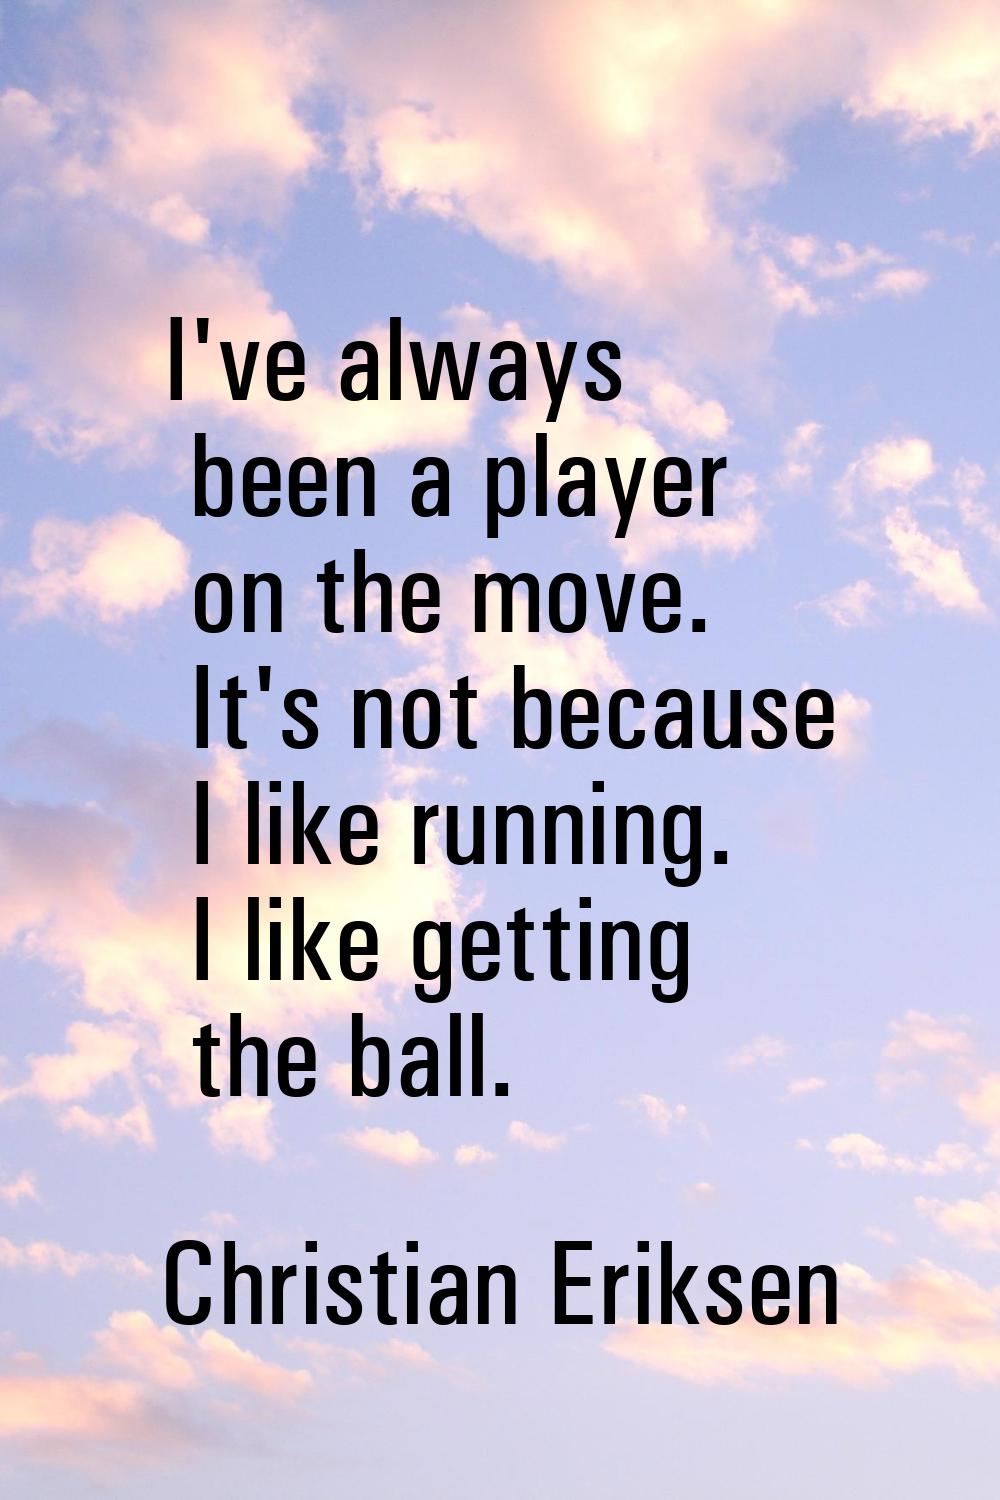 I've always been a player on the move. It's not because I like running. I like getting the ball.